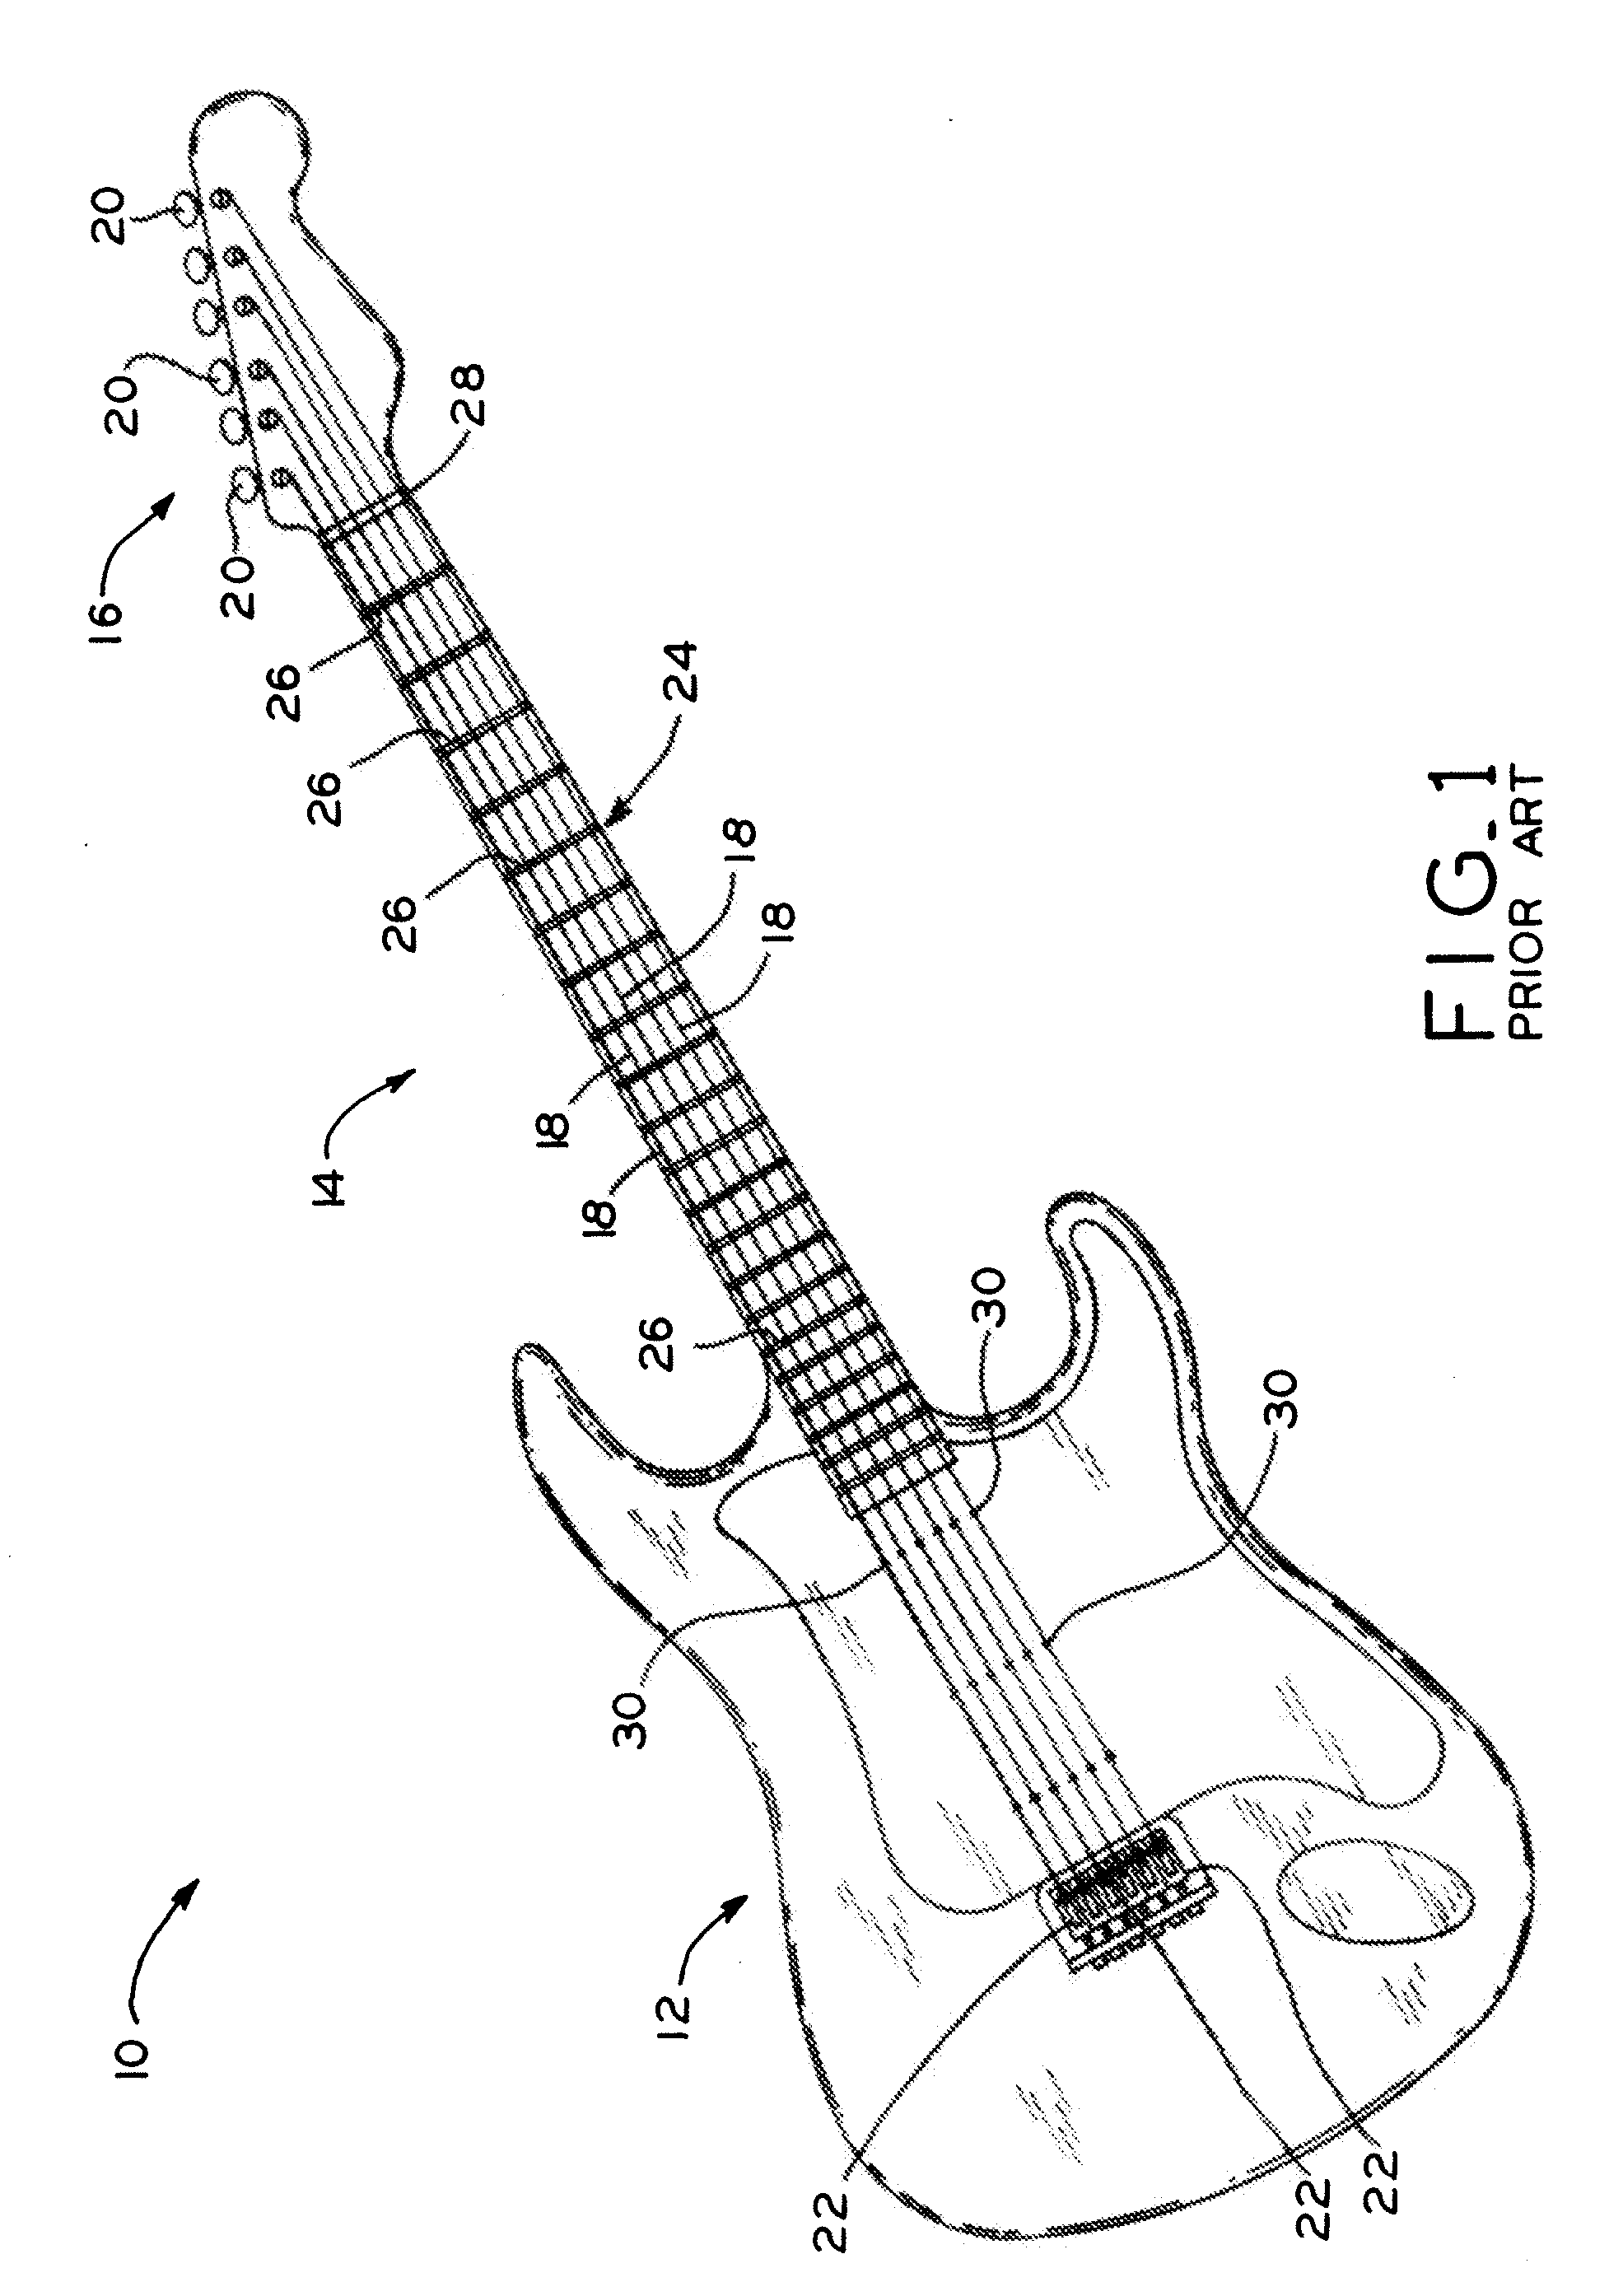 Stringed instrument having components made from glass and methods of manufacturing and assembling the same